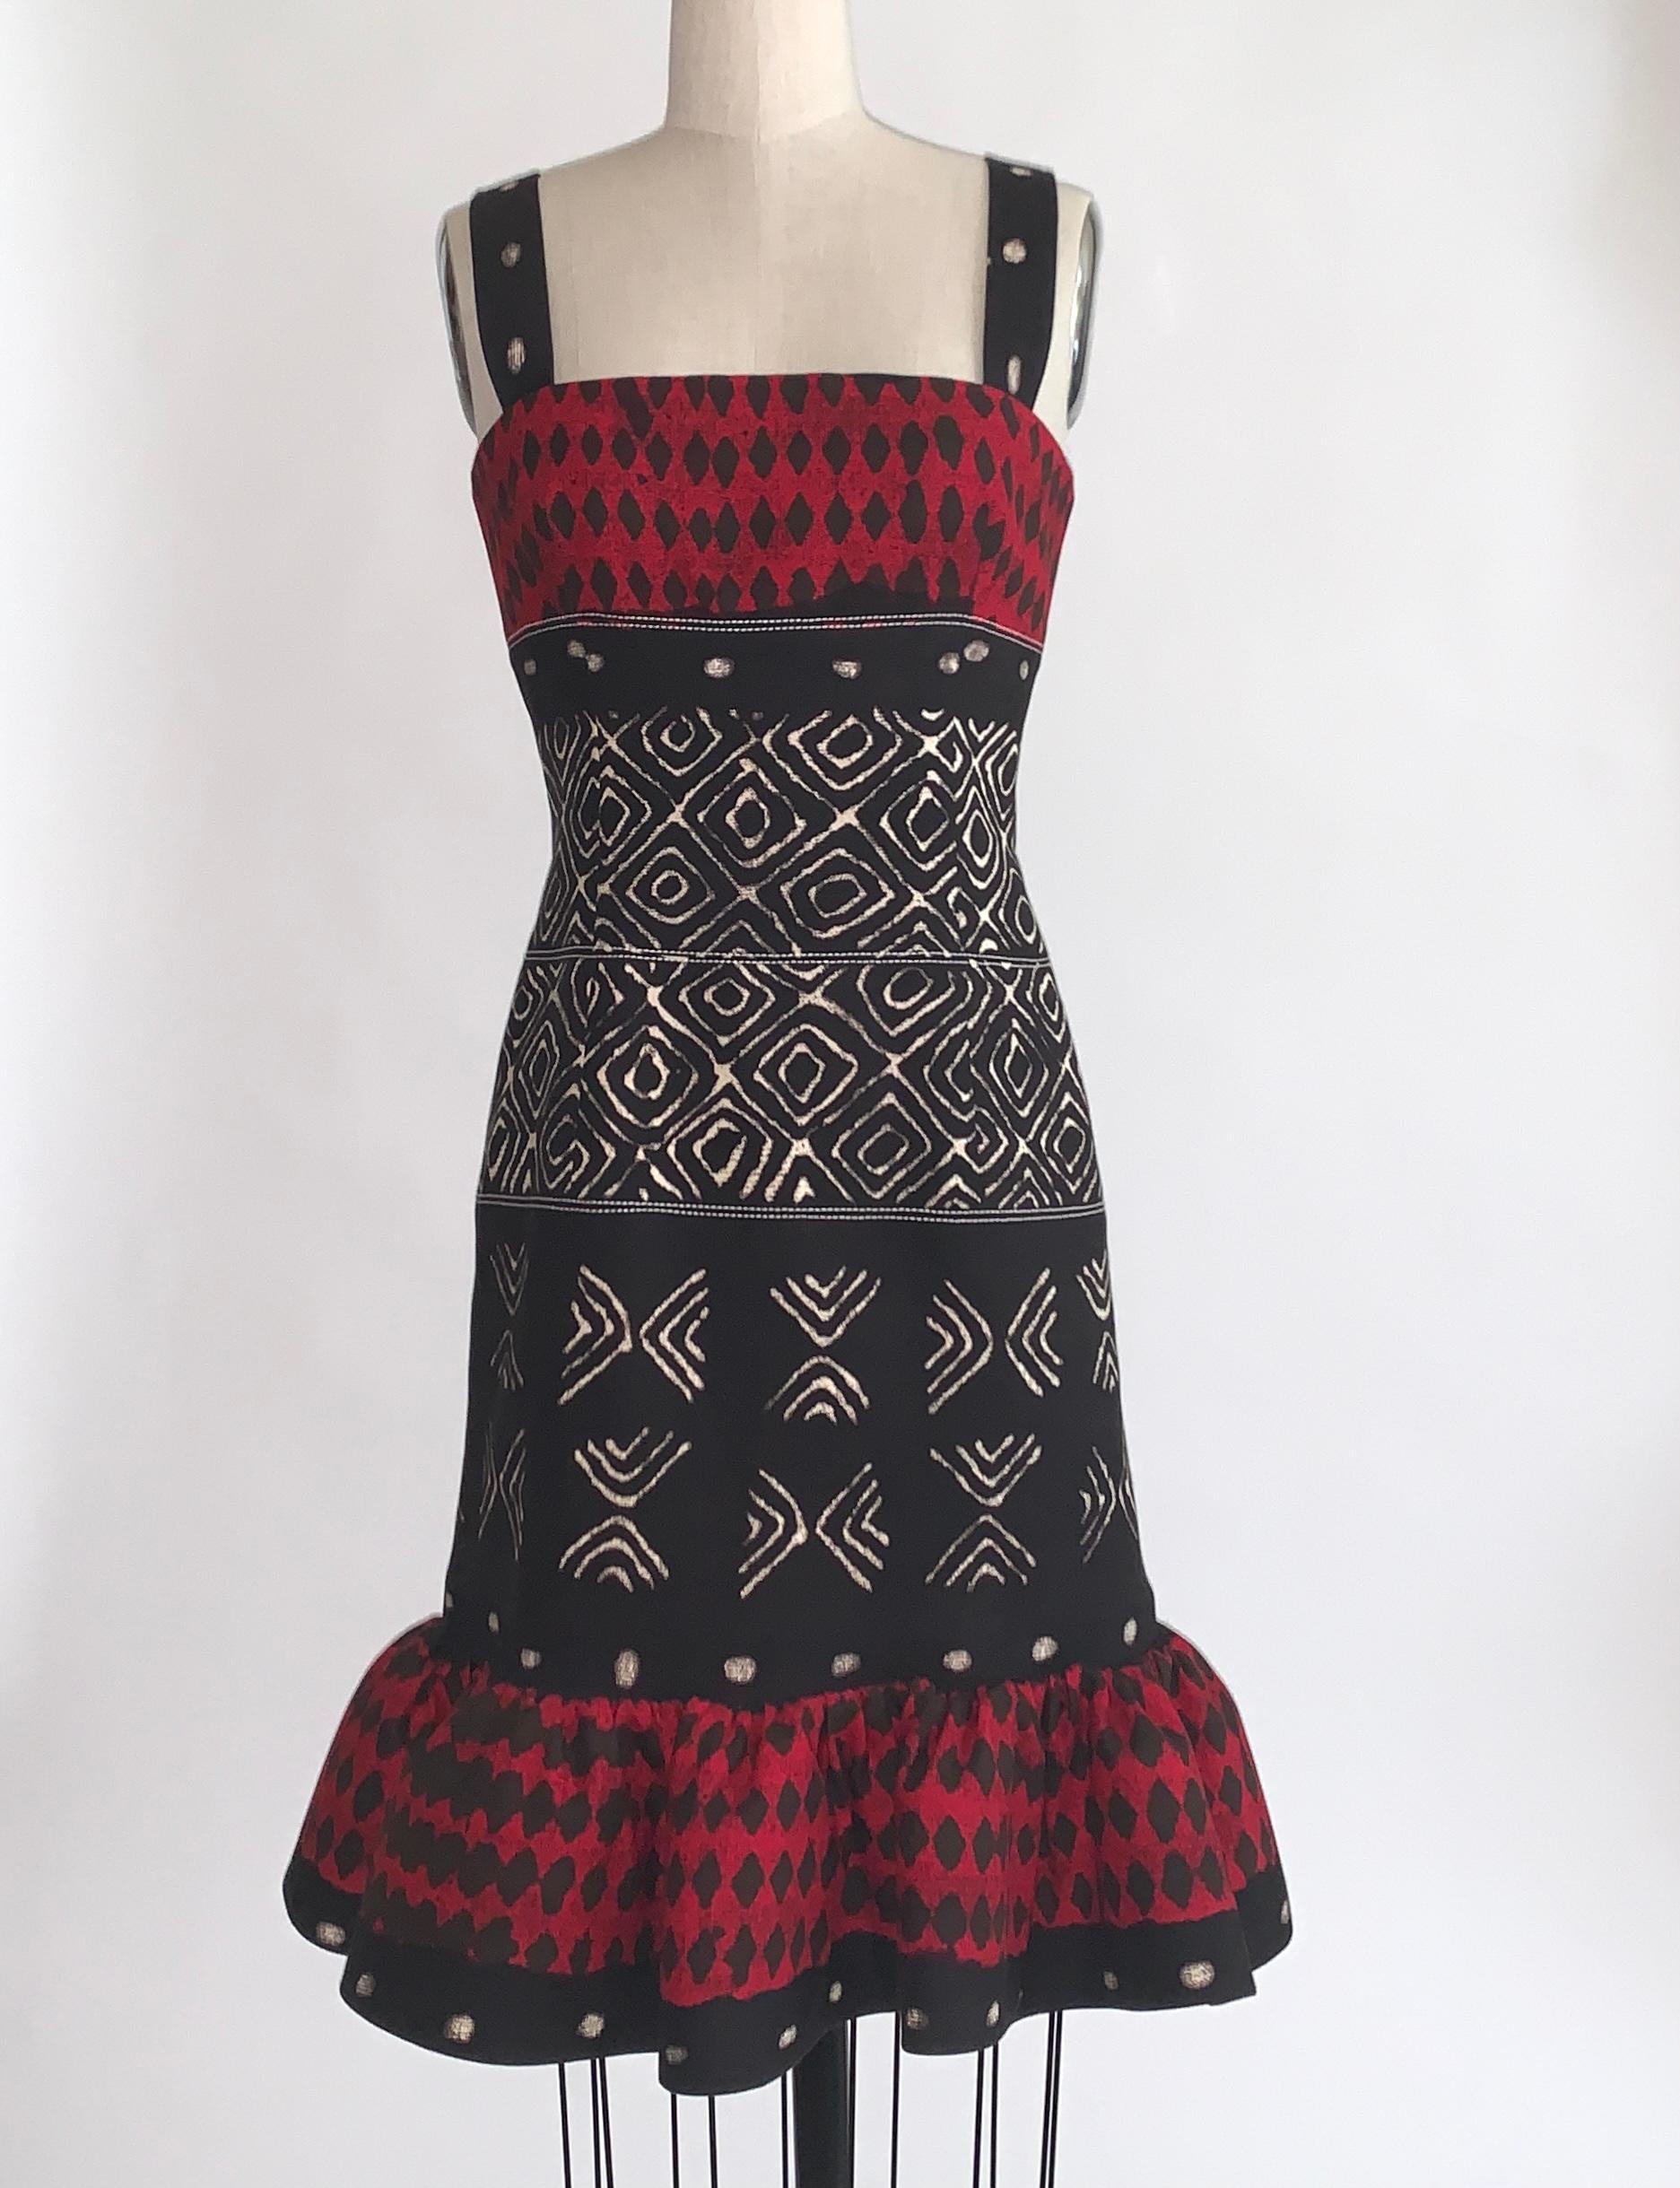 Oscar de la Renta red, black and ivory tribal ikat batik print sleeveless pencil dress with flared bottom. A thin stiff mesh ring at skirt bottom and light boning at side bust  and create dramatic shape. Back zip and hook and eye.

98% cotton, 2%